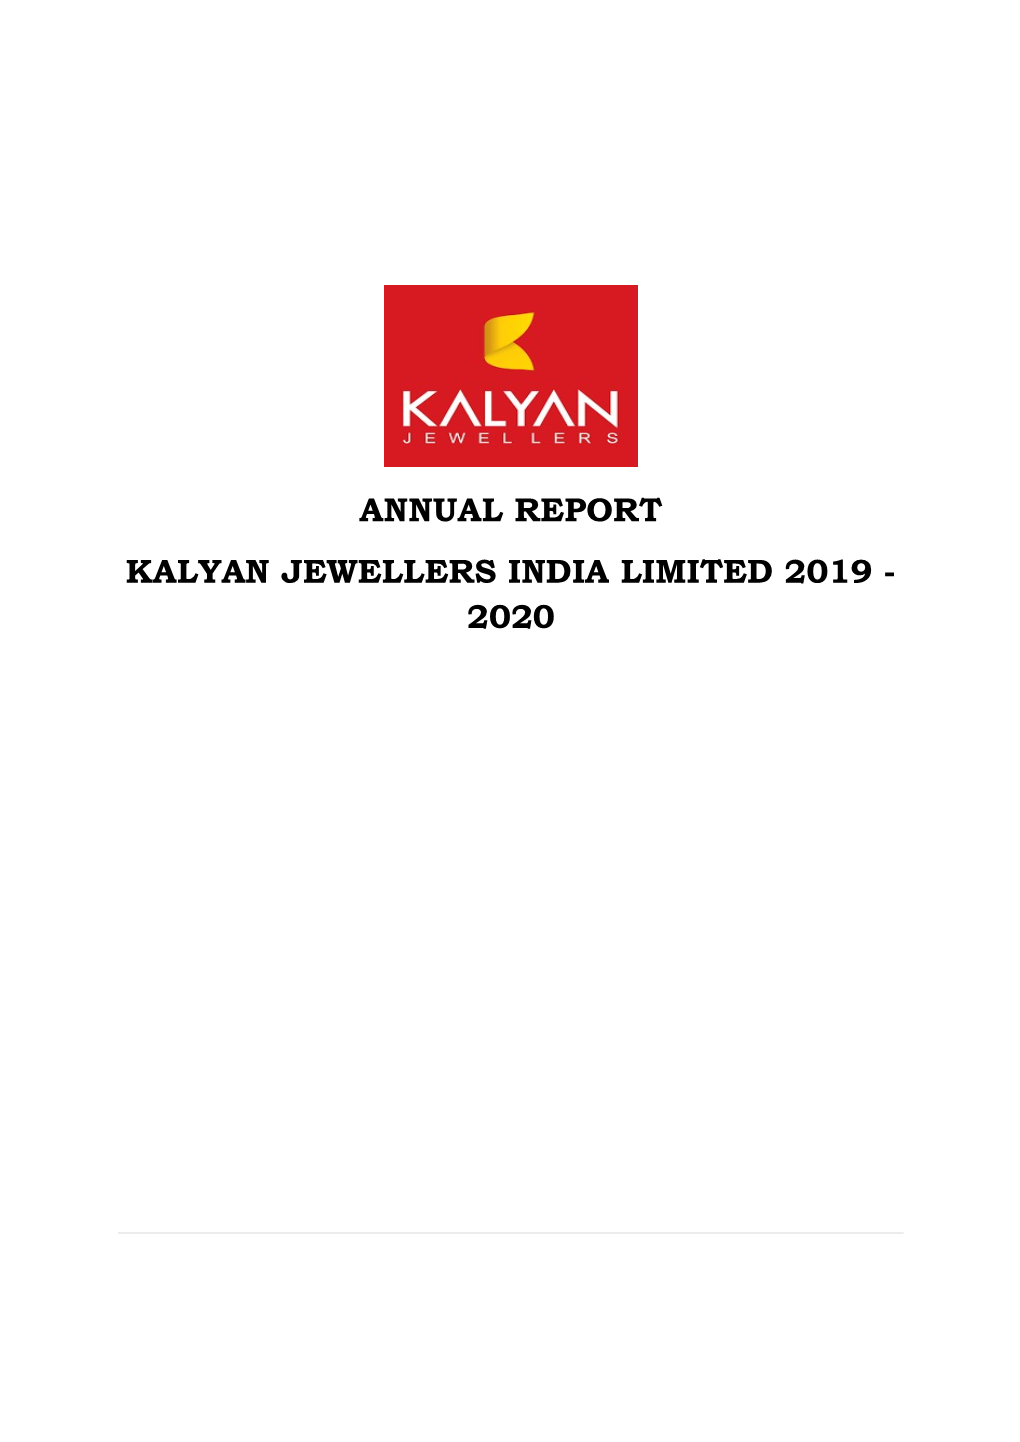 Annual Report Kalyan Jewellers India Limited 2019 - 2020